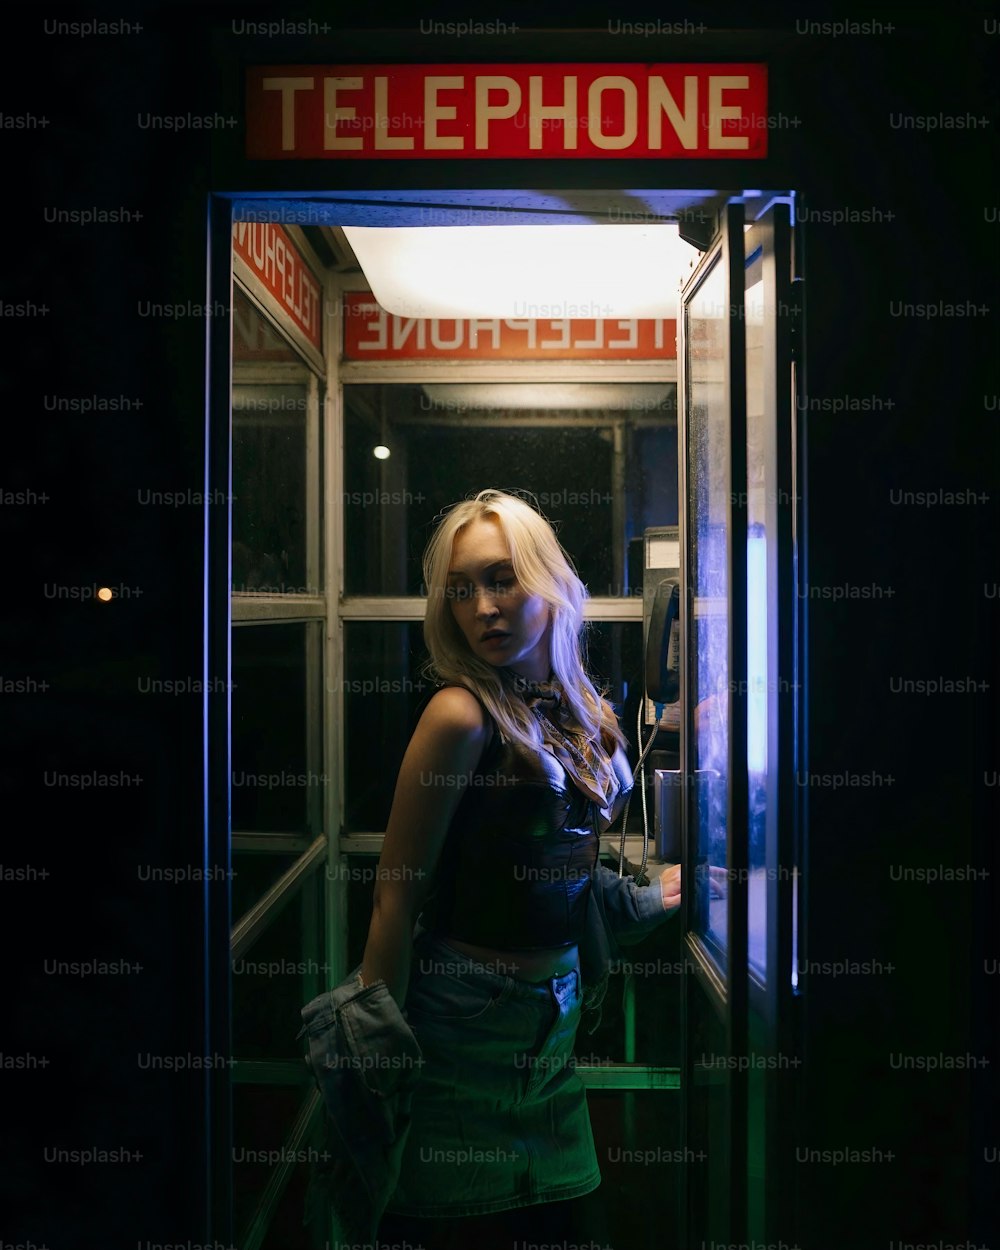 a woman is standing in a phone booth